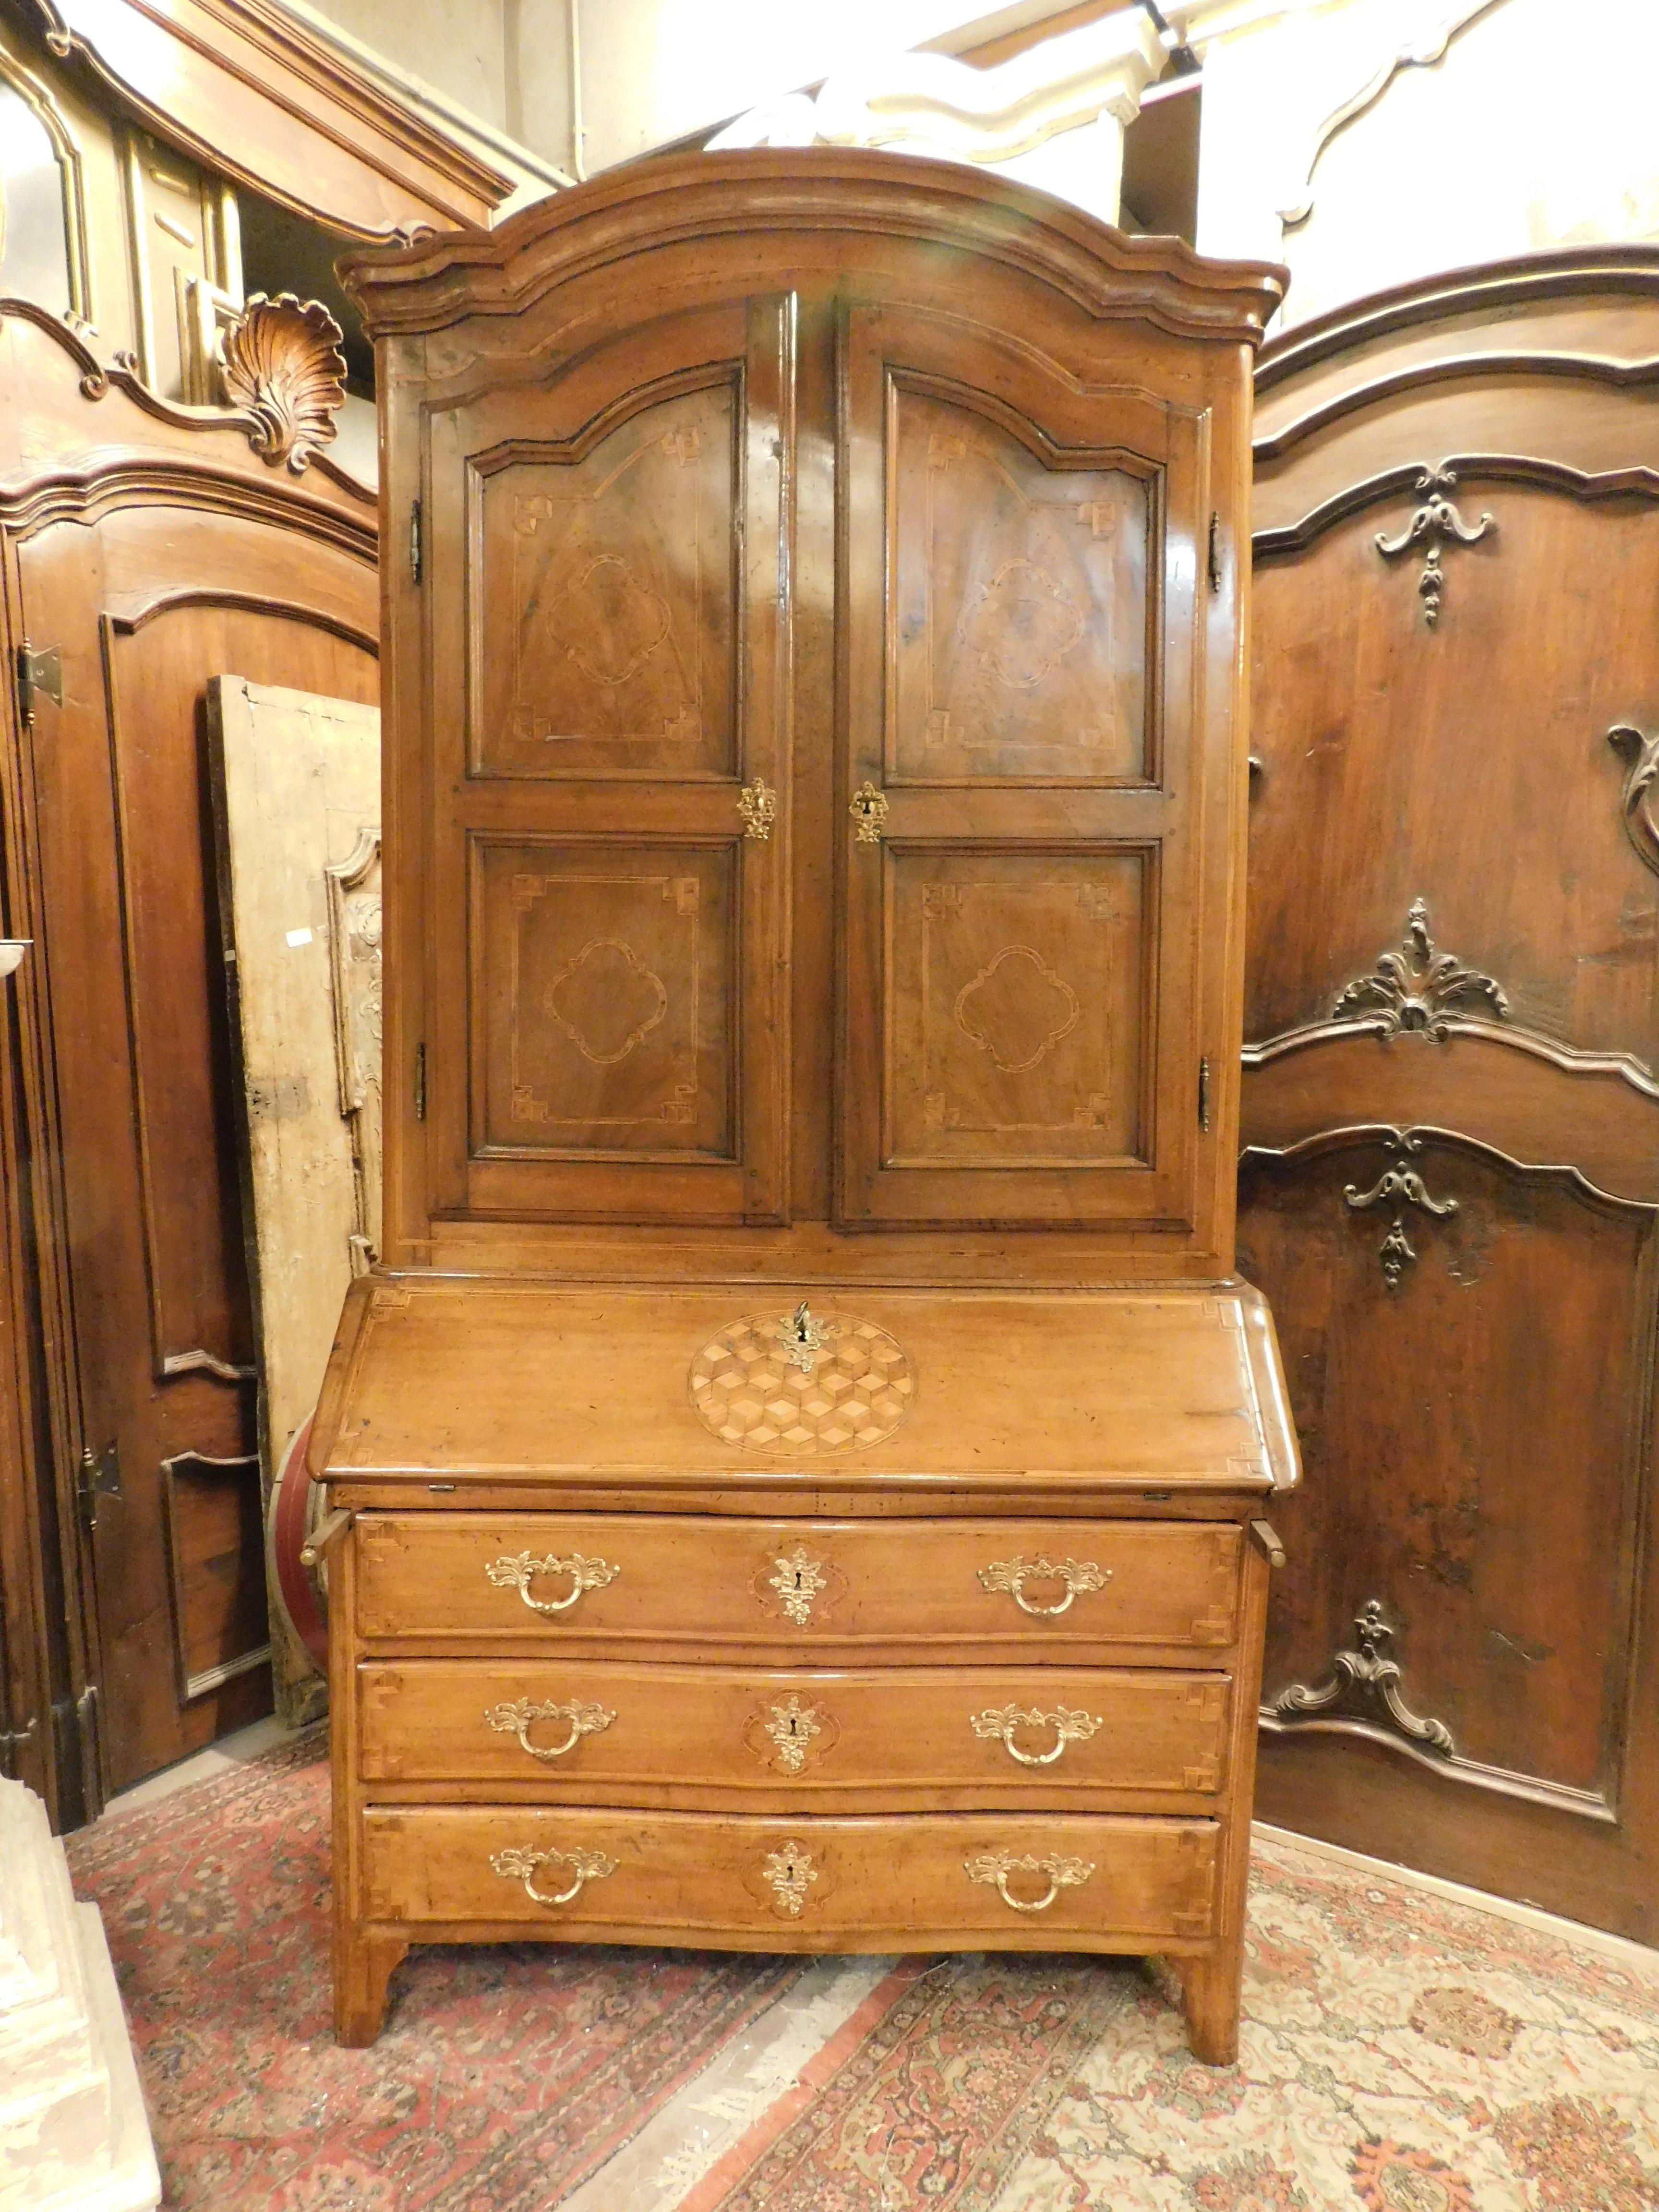 Antique Trumeau carved and built by hand in precious solid walnut wood, richly inlaid by hand with light woods, with wavy baroque tiles, checkerboard inlays and geometric shapes on the sides and in the details, composed of 2 doors in the upper part,